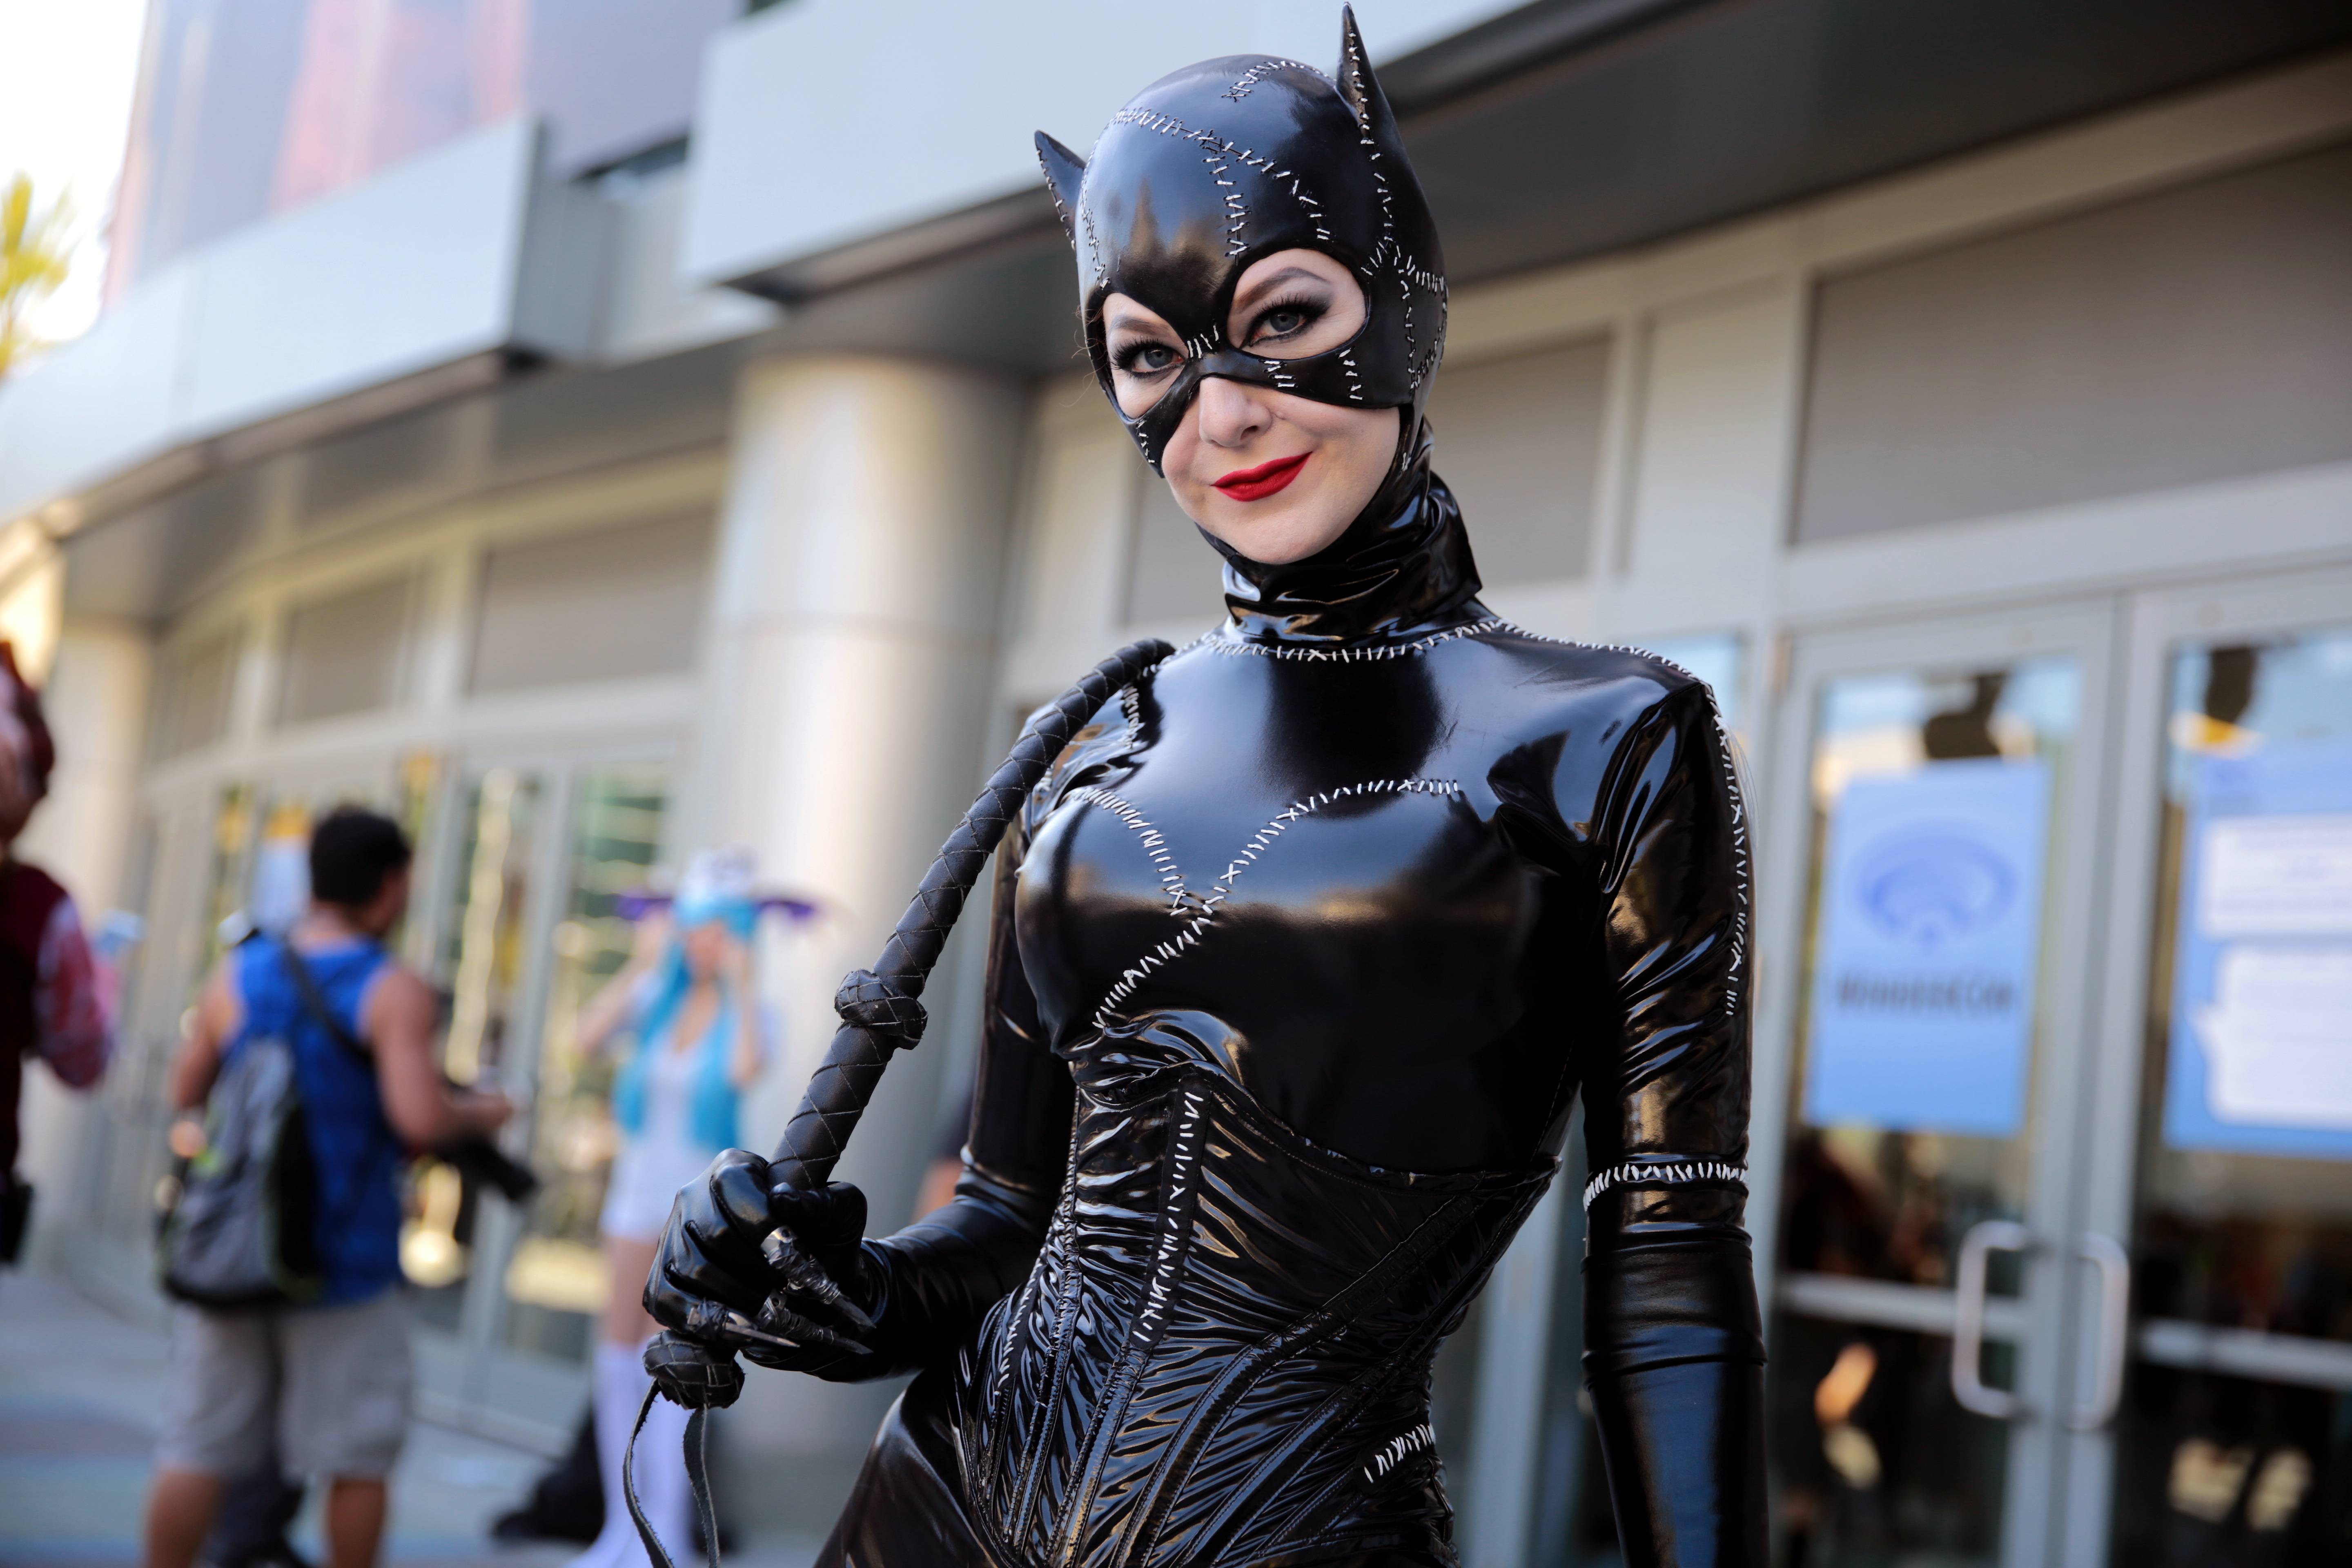 Catwoman or Selina Kyle is a fictional Batman character who appears in comi...